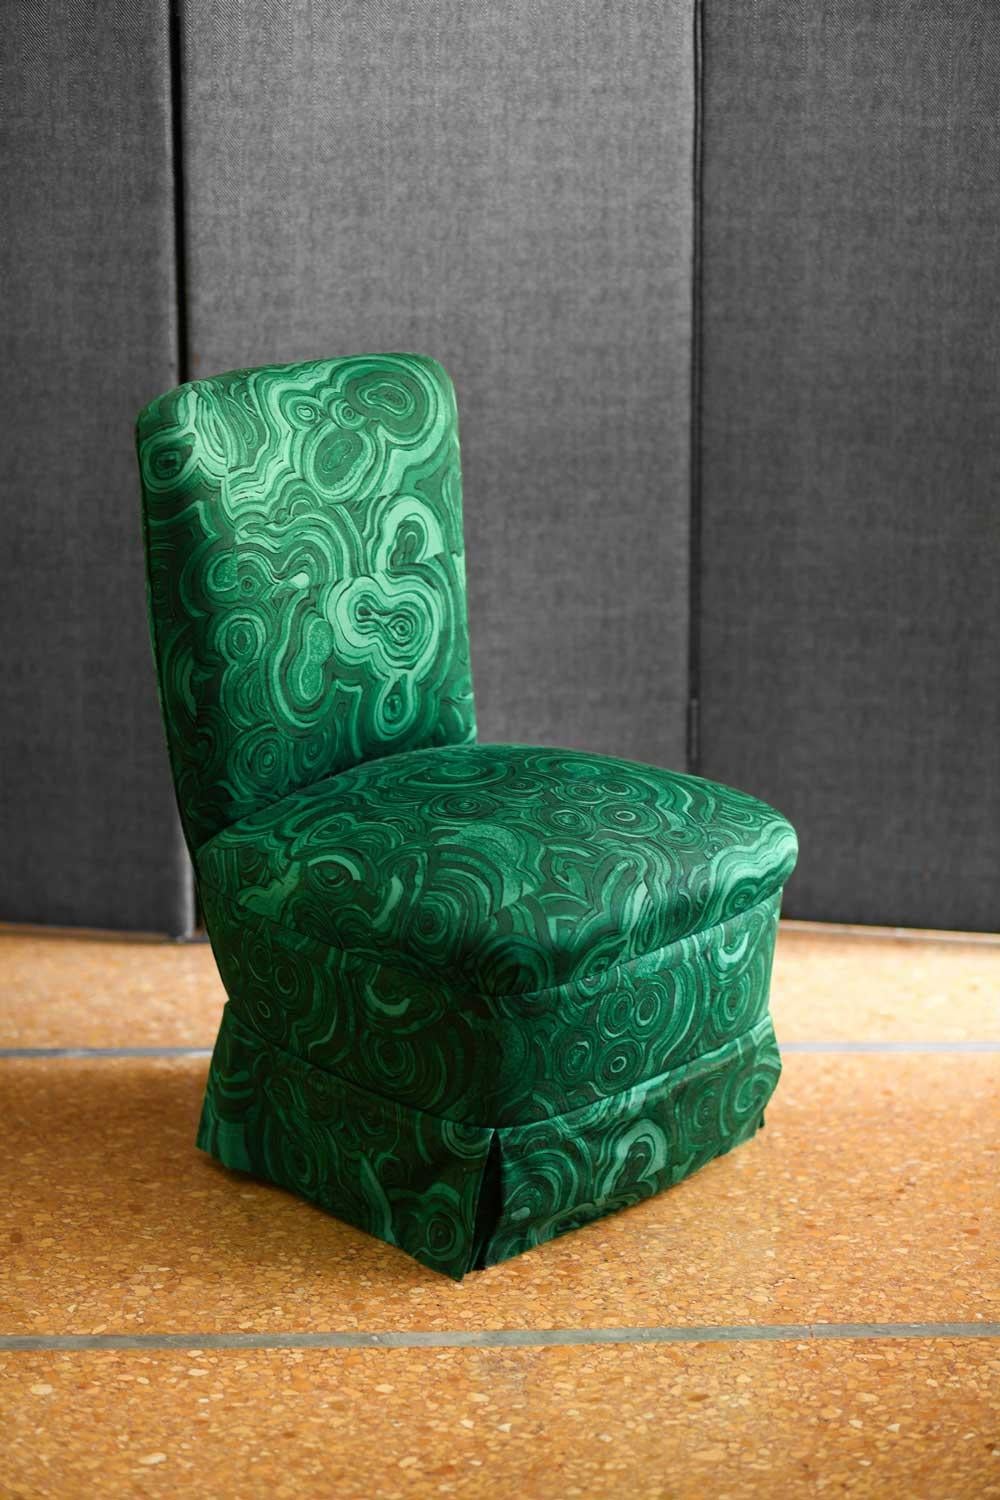 Pair of Armchairs in Malachite green gemstone fabric by Tony Duquette
The design was originally hand painted and later printed on cotton fabric. 
Tony Duquette considered malachite a talisman and loved to apply its variegated pattern on furniture,